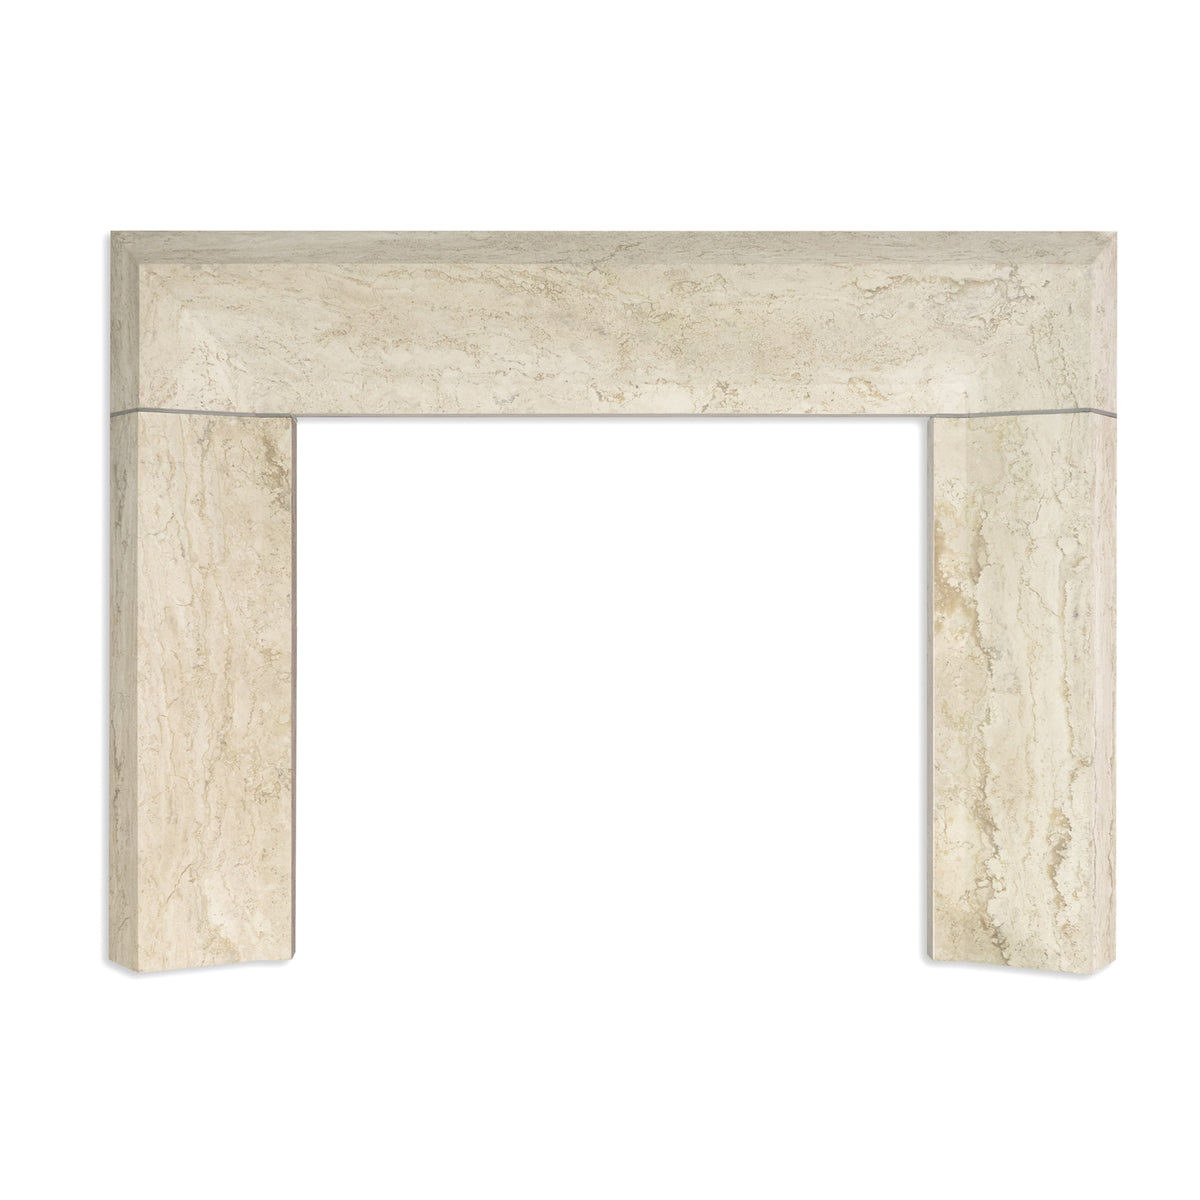 Meridian Fireplace in Maderno Travertine with Honed Finish (Extended Range) Main Product Slider View